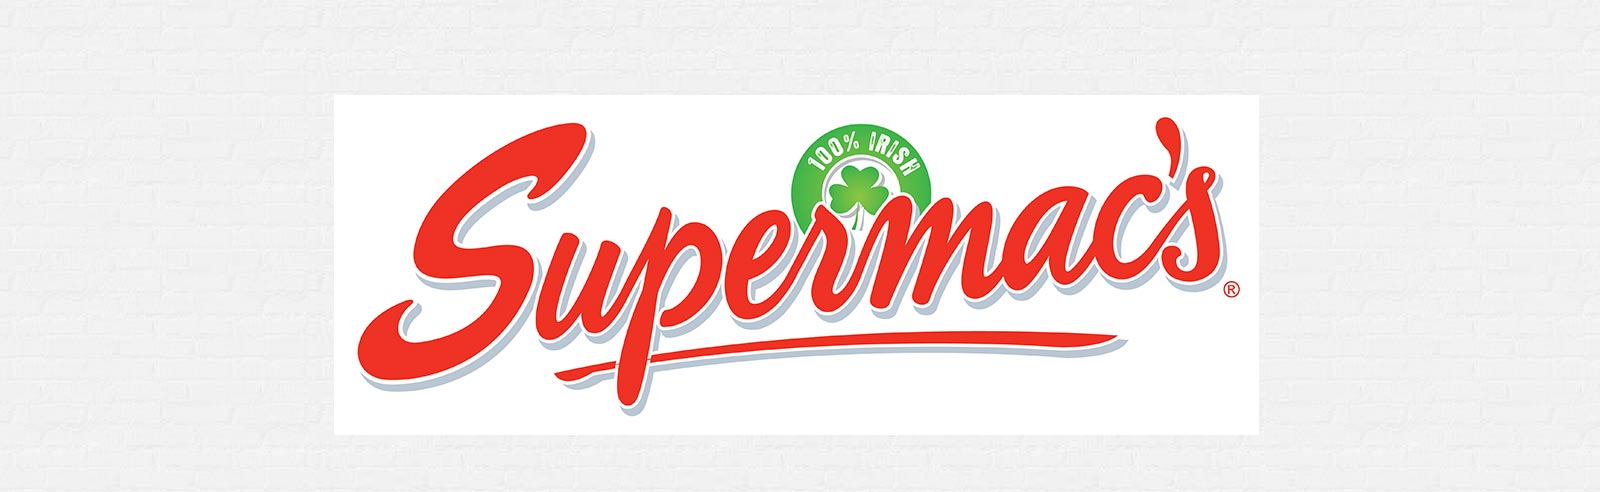 Supermac’s makes Submission to OHIM in Significant EU Trademark Case